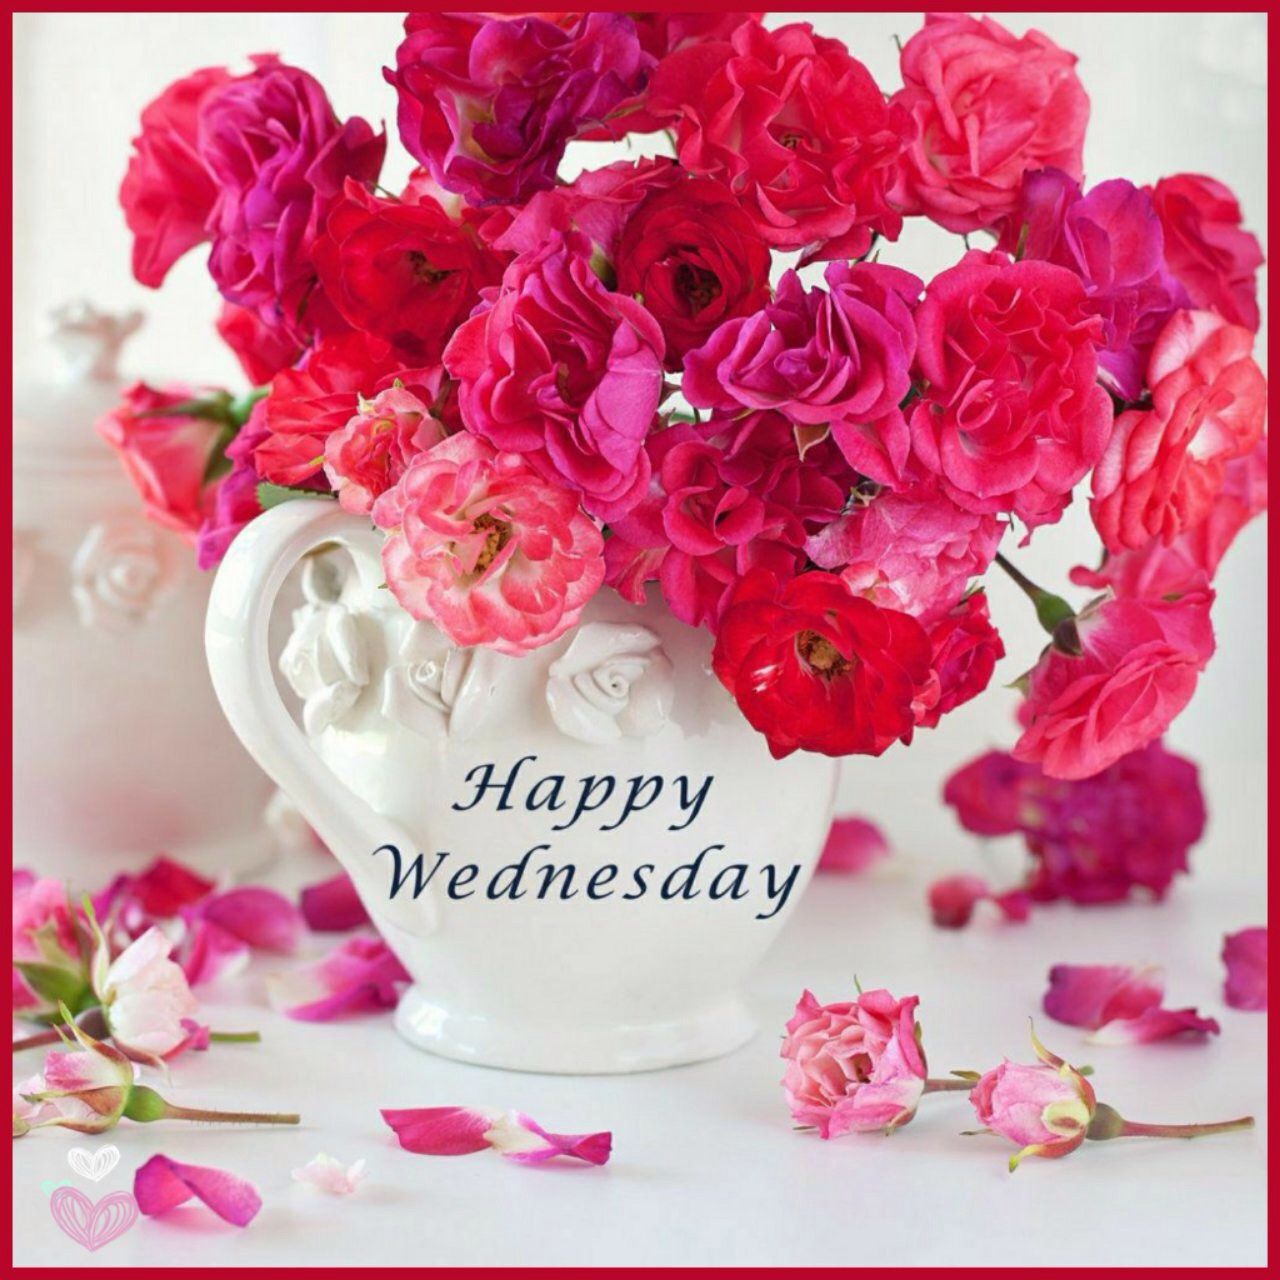 More Like This - Happy Wednesday With Roses , HD Wallpaper & Backgrounds